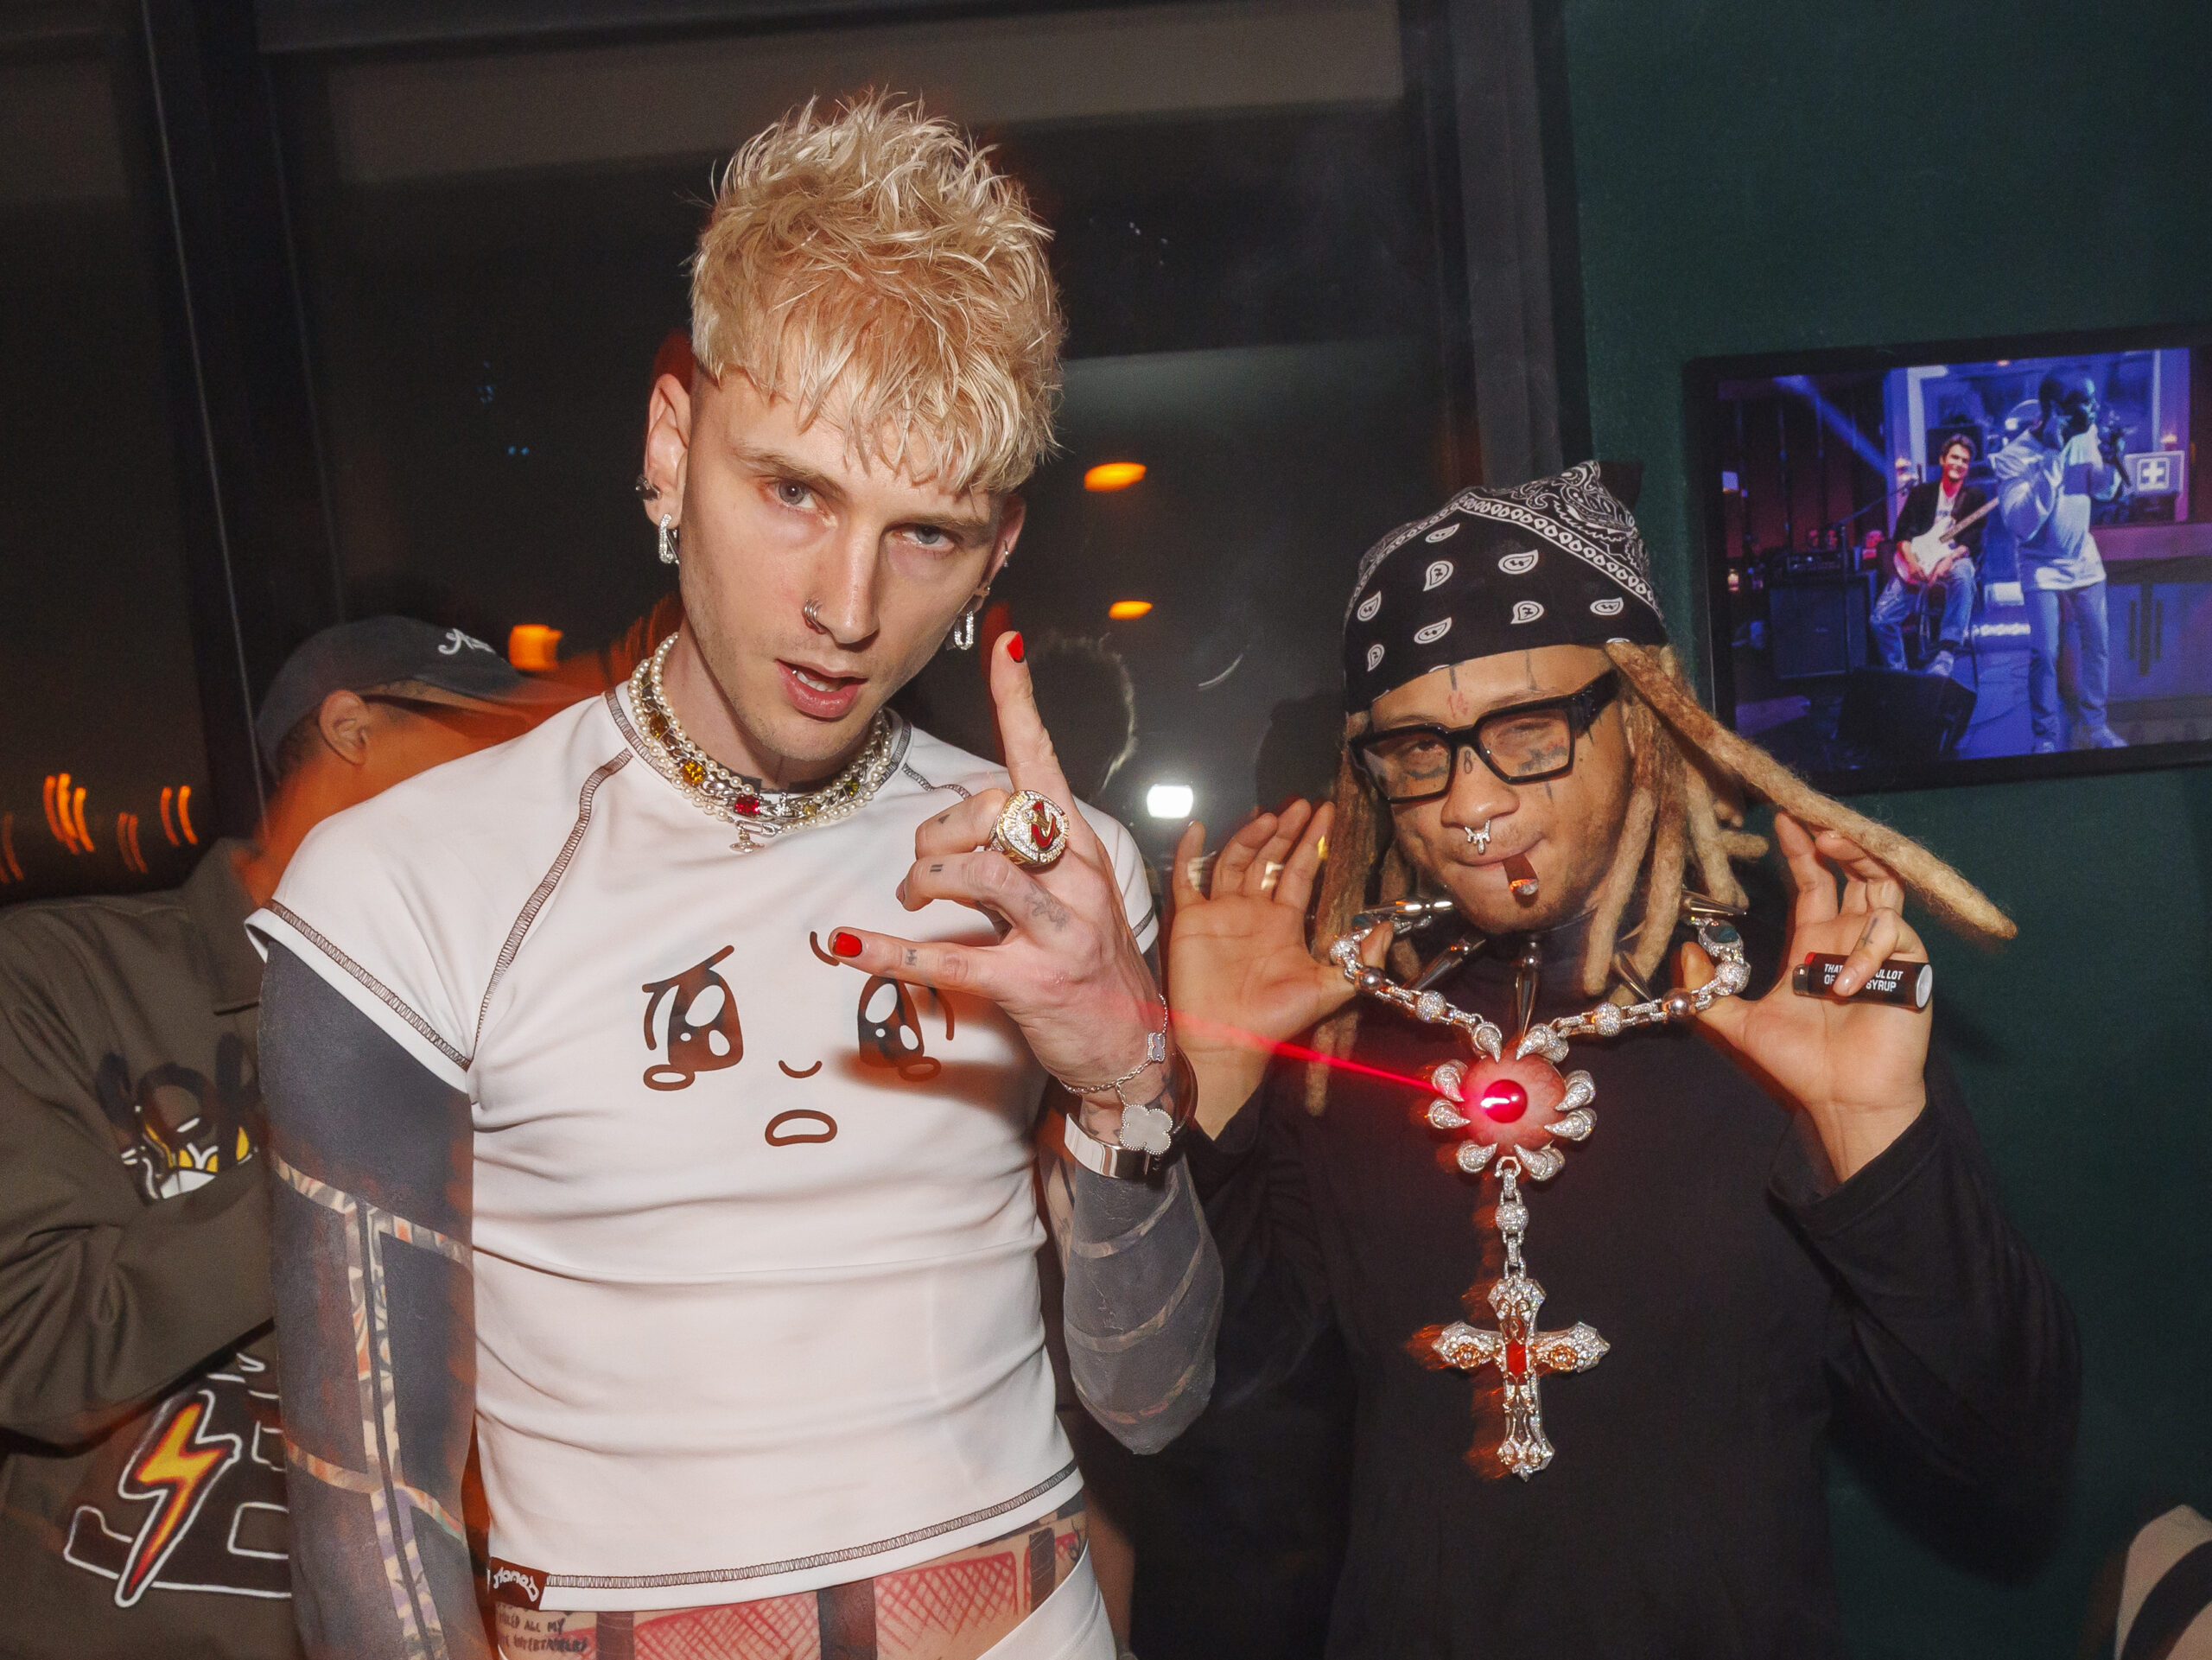 MGK (Machine Gun Kelly) and Trippie Redd at the March 21 listening party for their collaborative EP, genre : sadboy, at Harriet's Rooftop in West Hollywood.